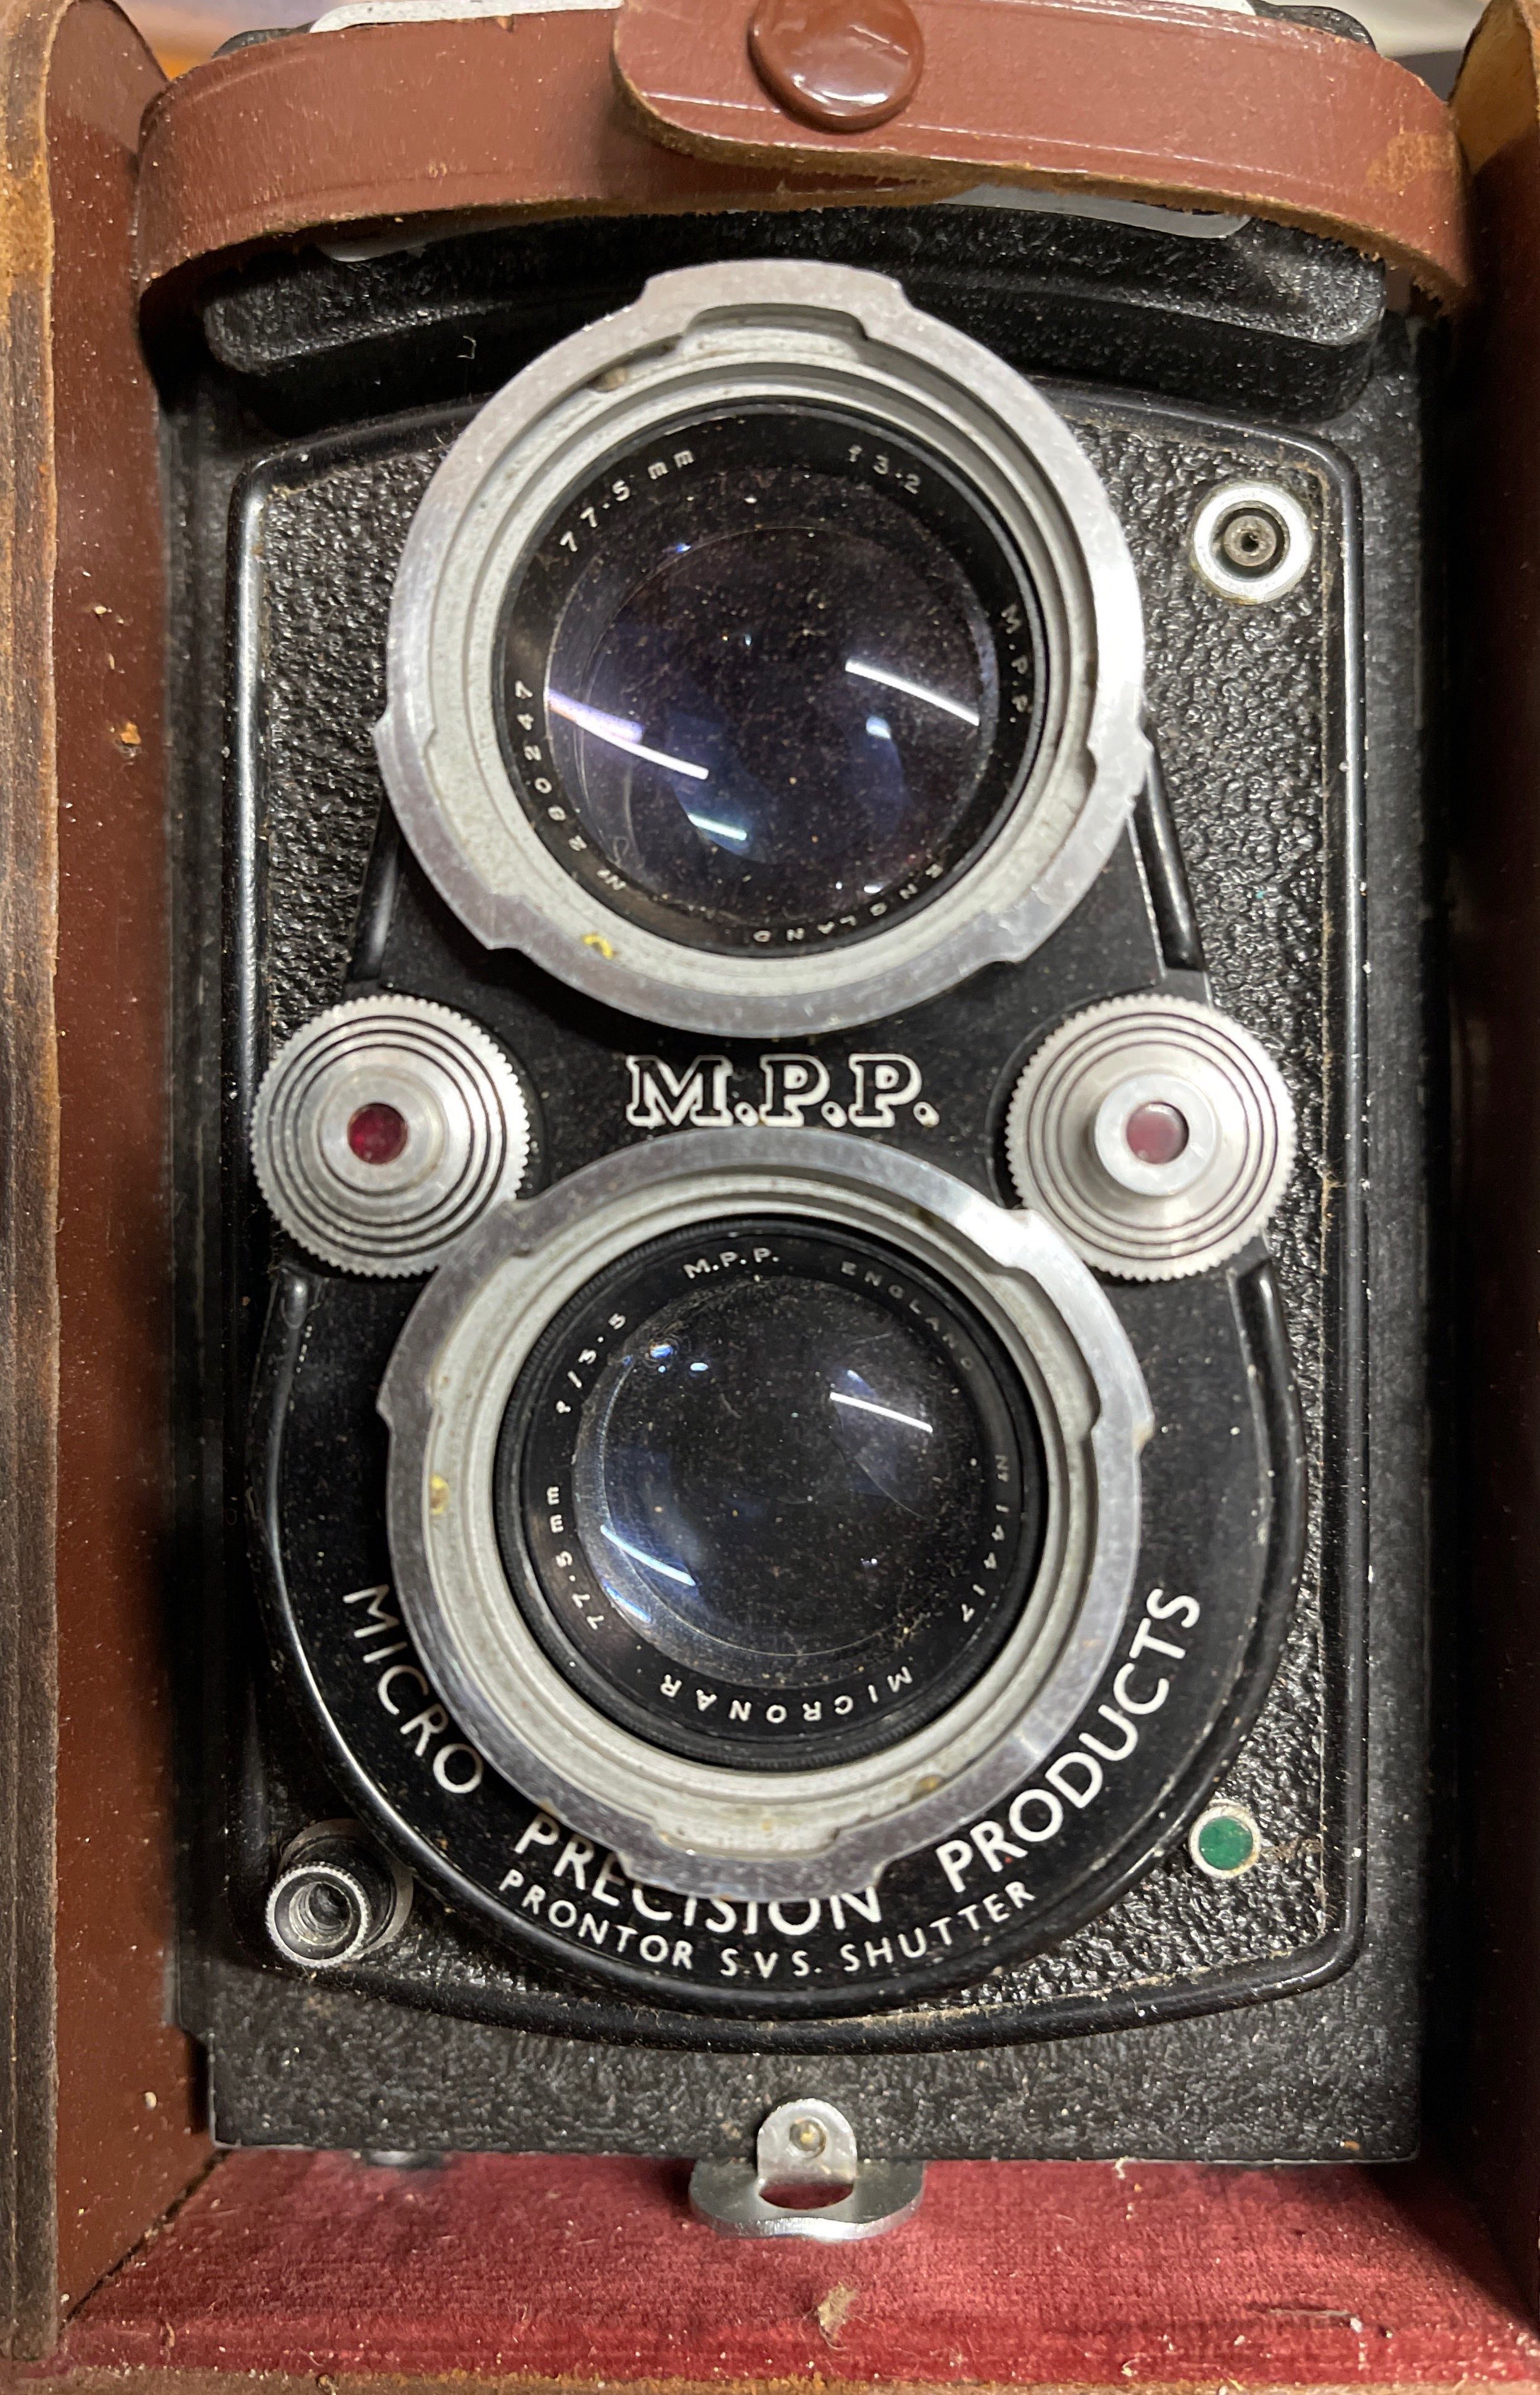 A MicroFlex MPP twin lens reflex camera with a three clasp spirit case, and an Olympus camera. - Image 2 of 2